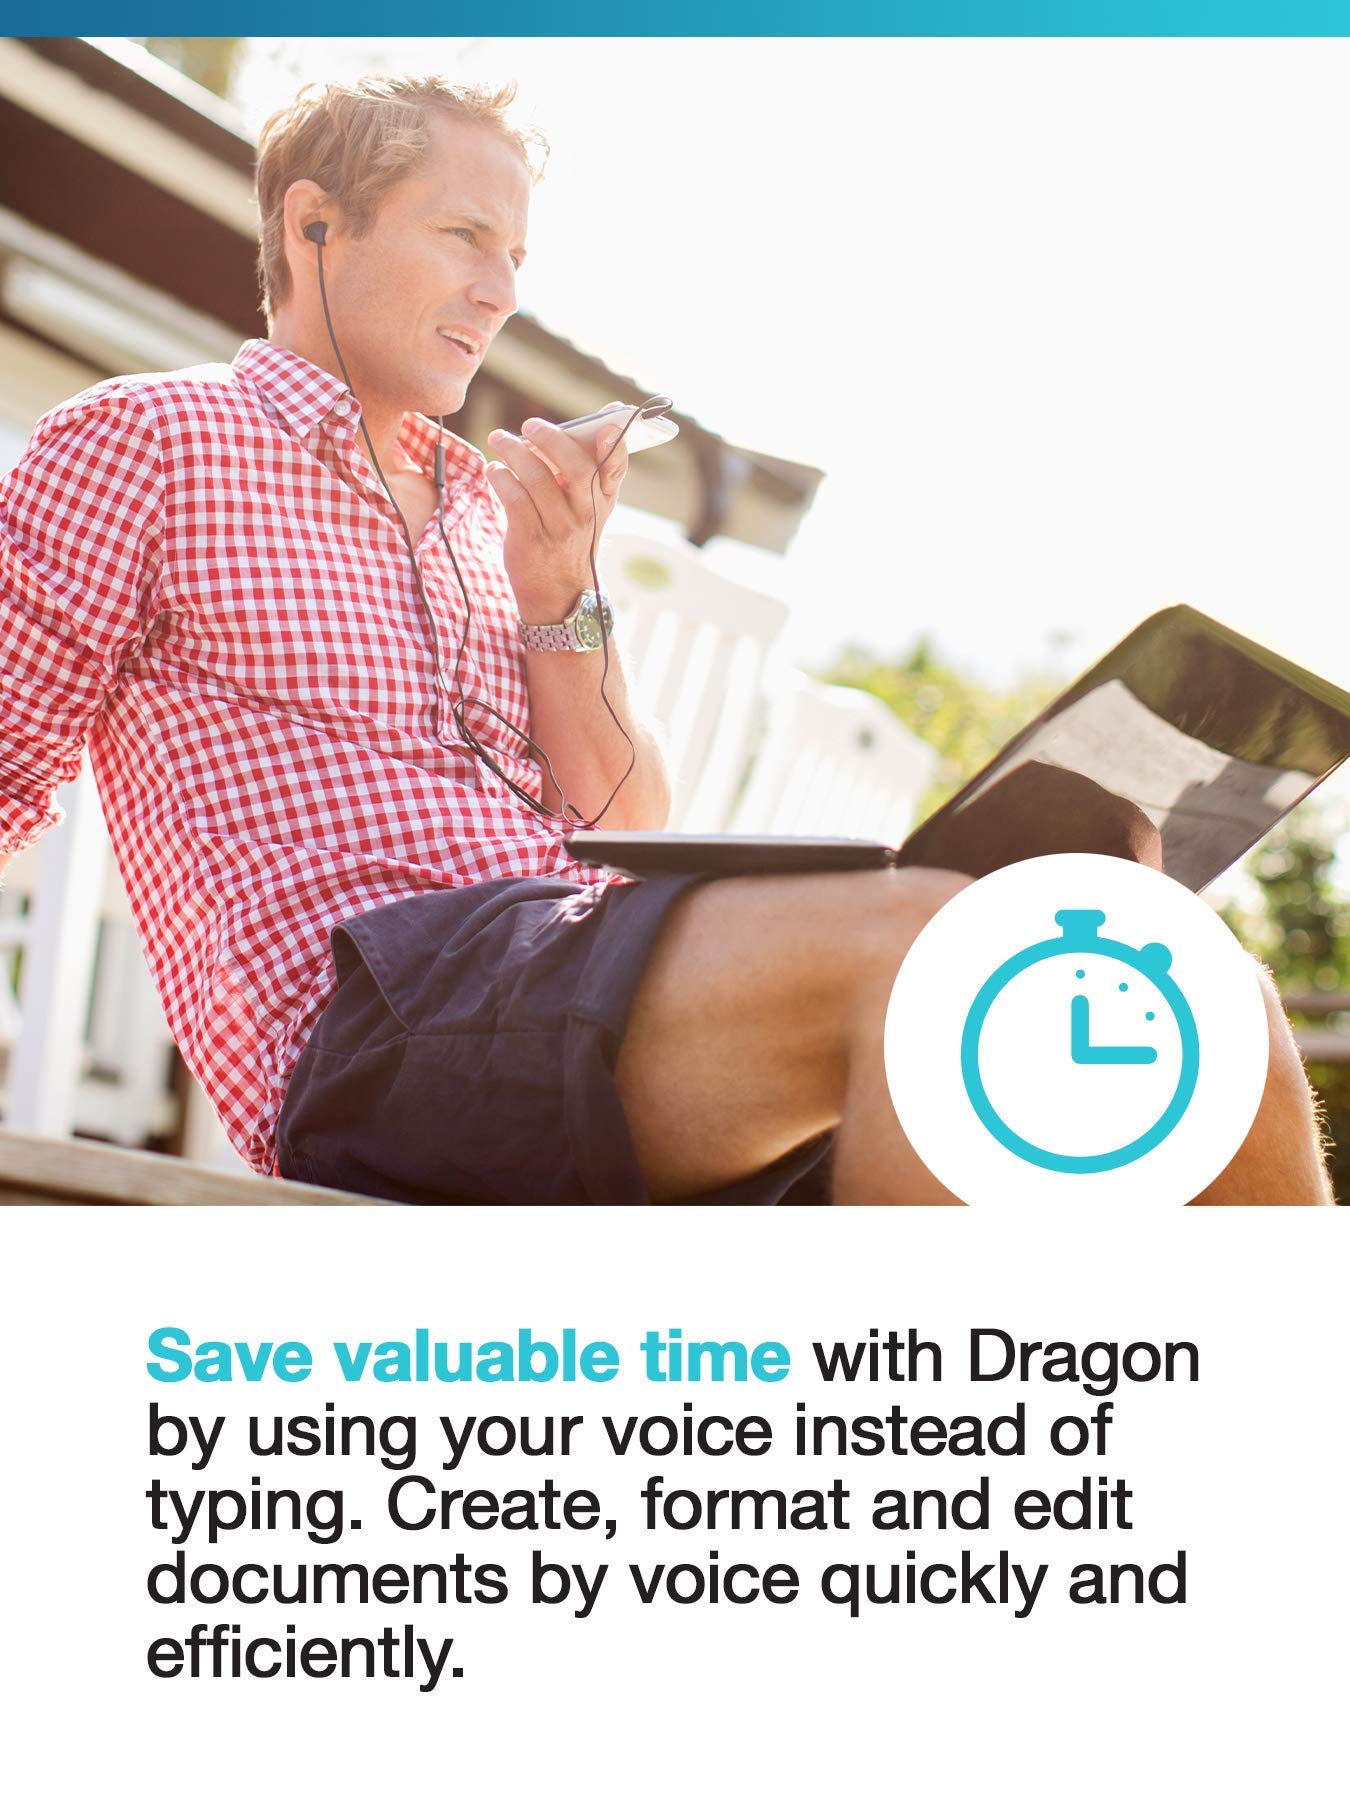 Dragon Professional 16.0 Speech Dictation and Voice Recognition Software [PC Download]